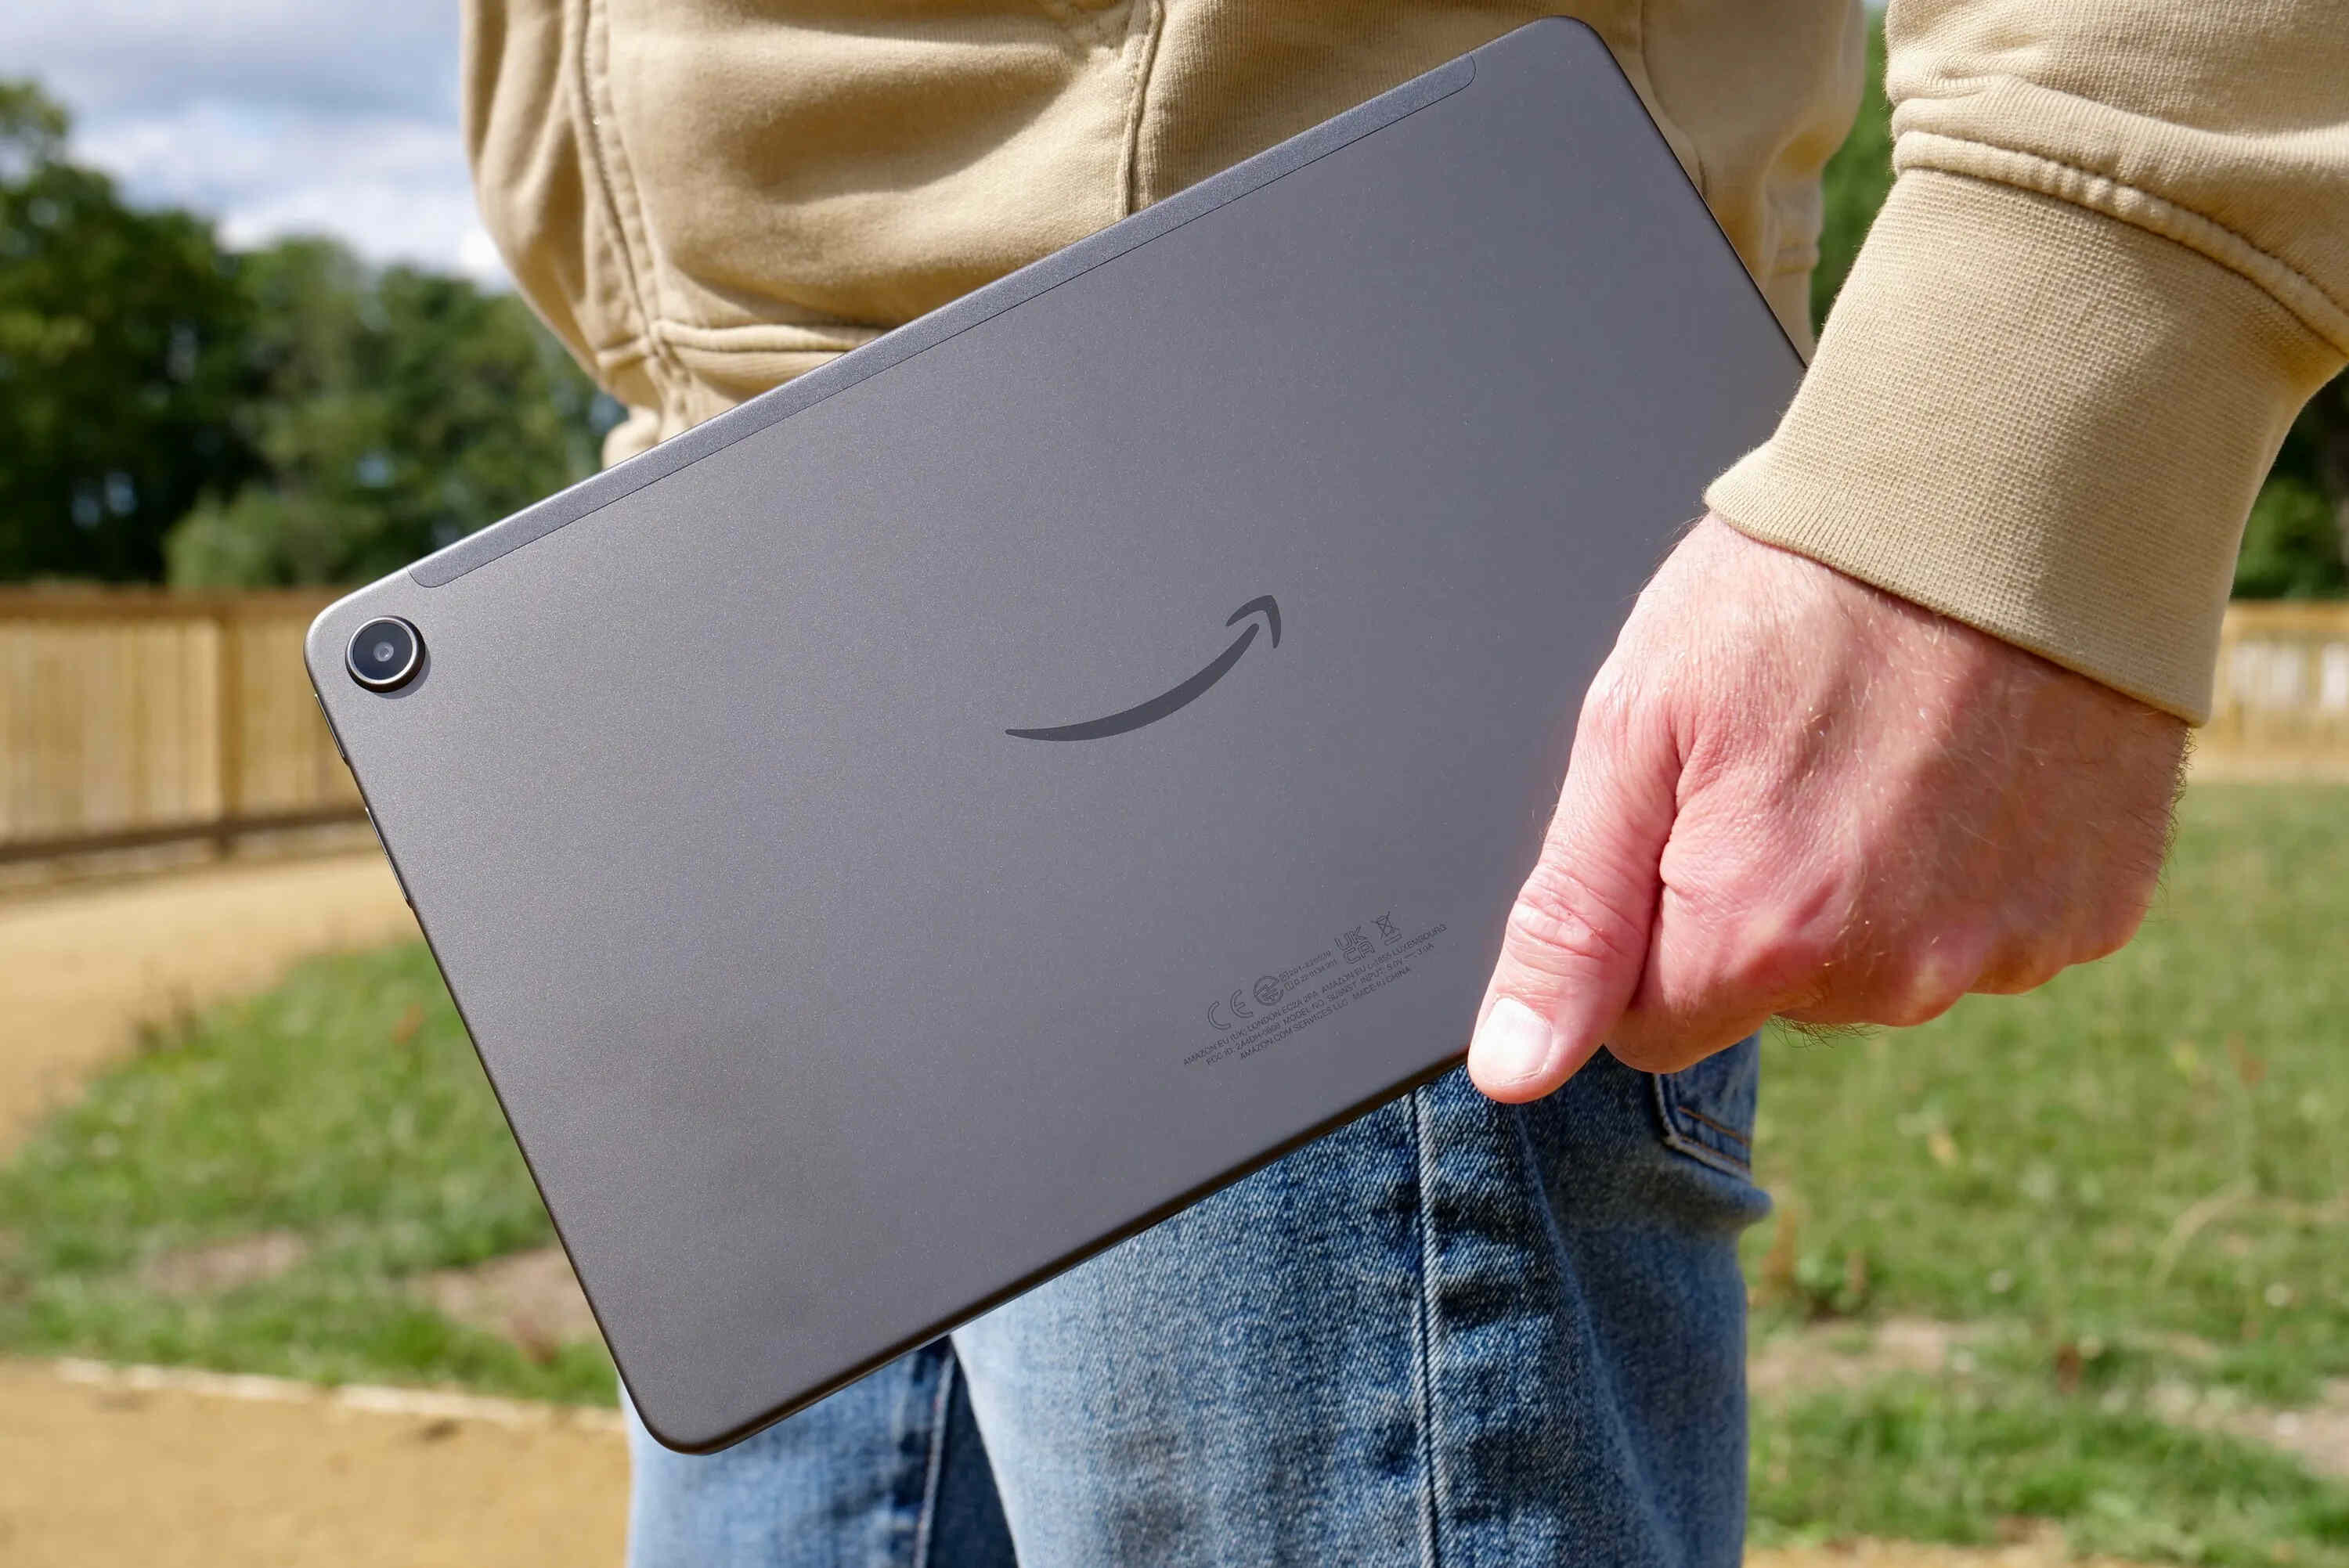 How To Use Hotspot On Amazon Fire Tablet